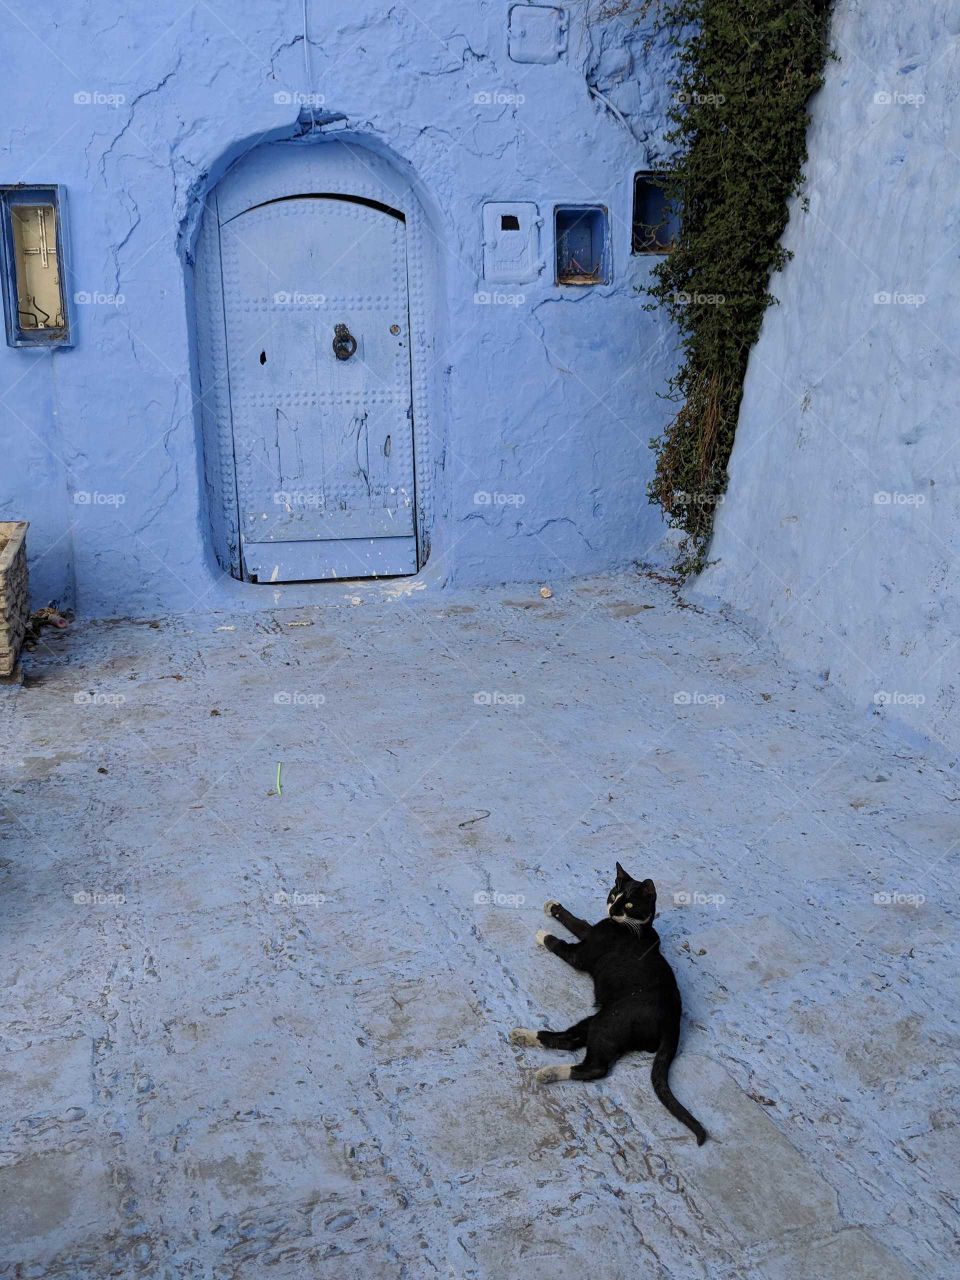 Blue Moroccan doorway with a Black Cat with White Markings Lounging Around in a Lazy Way on a Lazy Day (in the Blue City of Chefchaouen in Morocco)